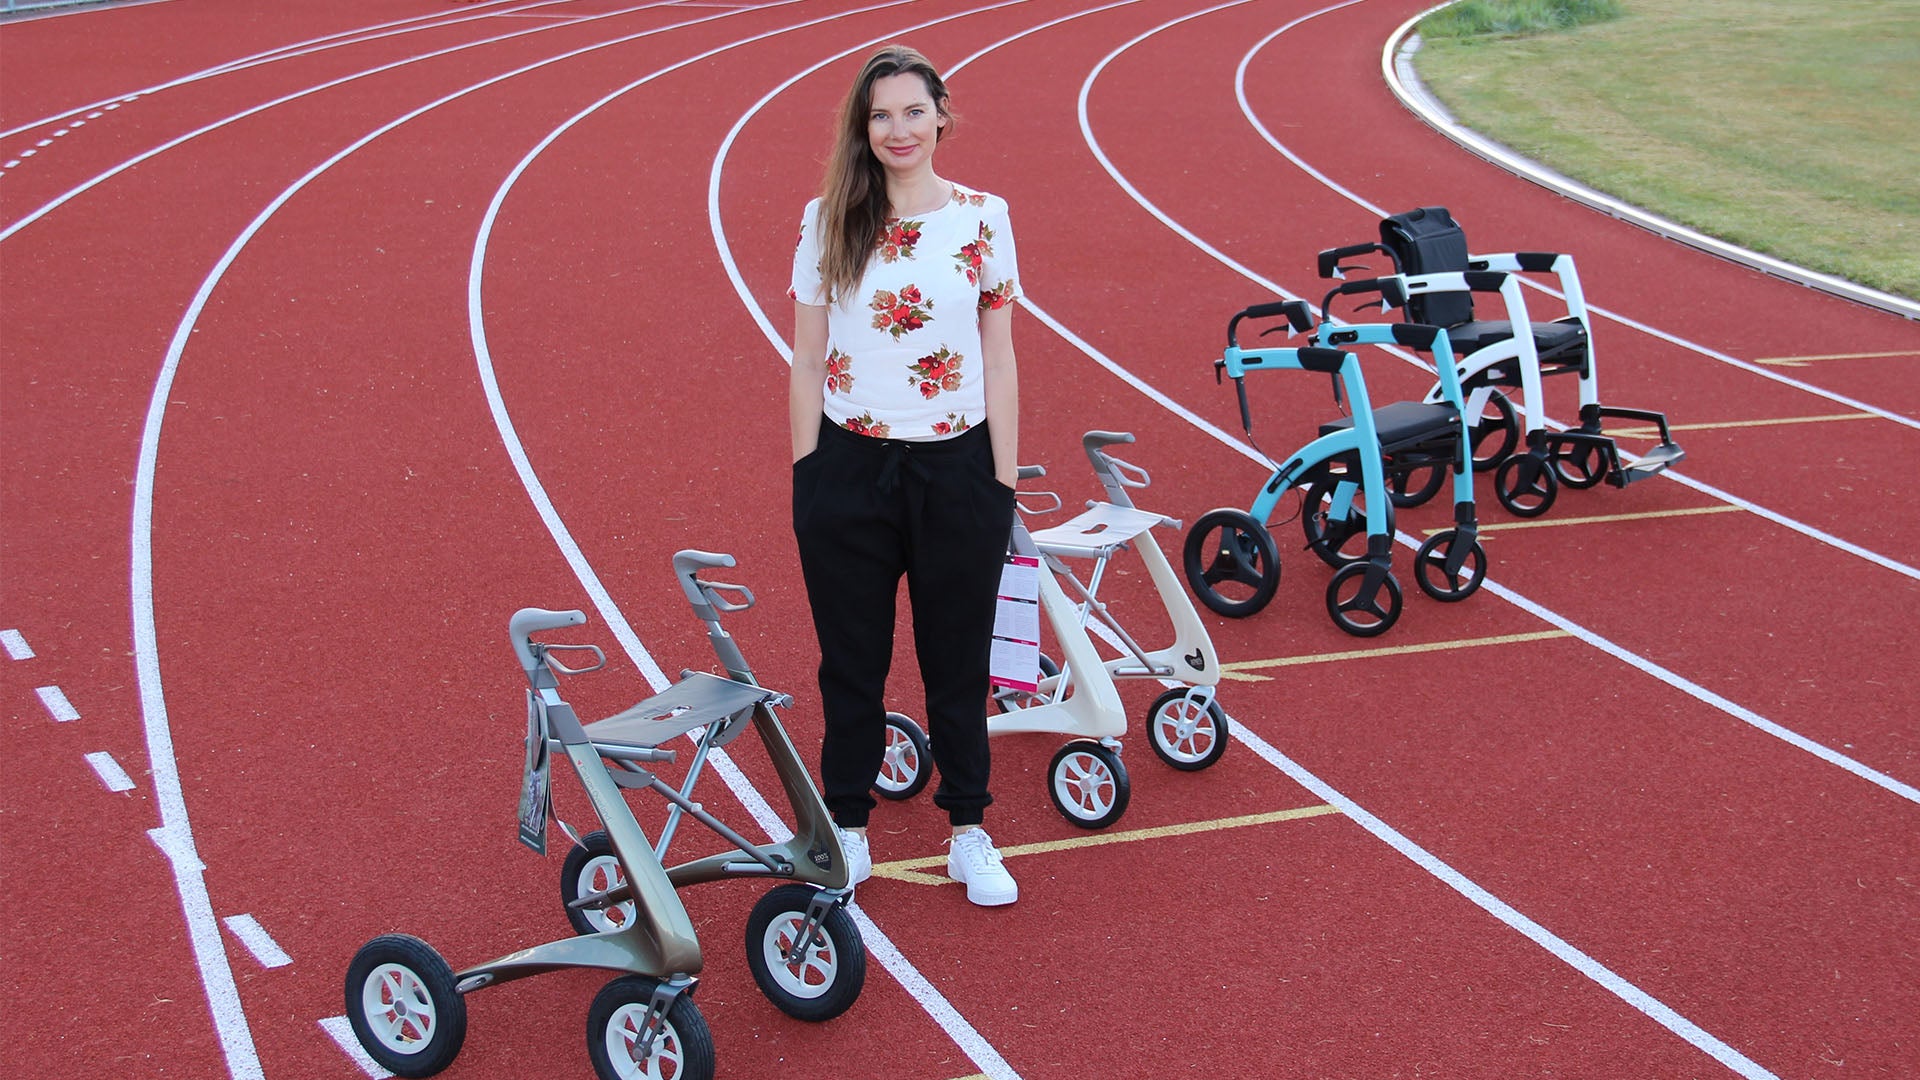 Anna Wallace stands on an athletics track with four different styles of modern walking frames